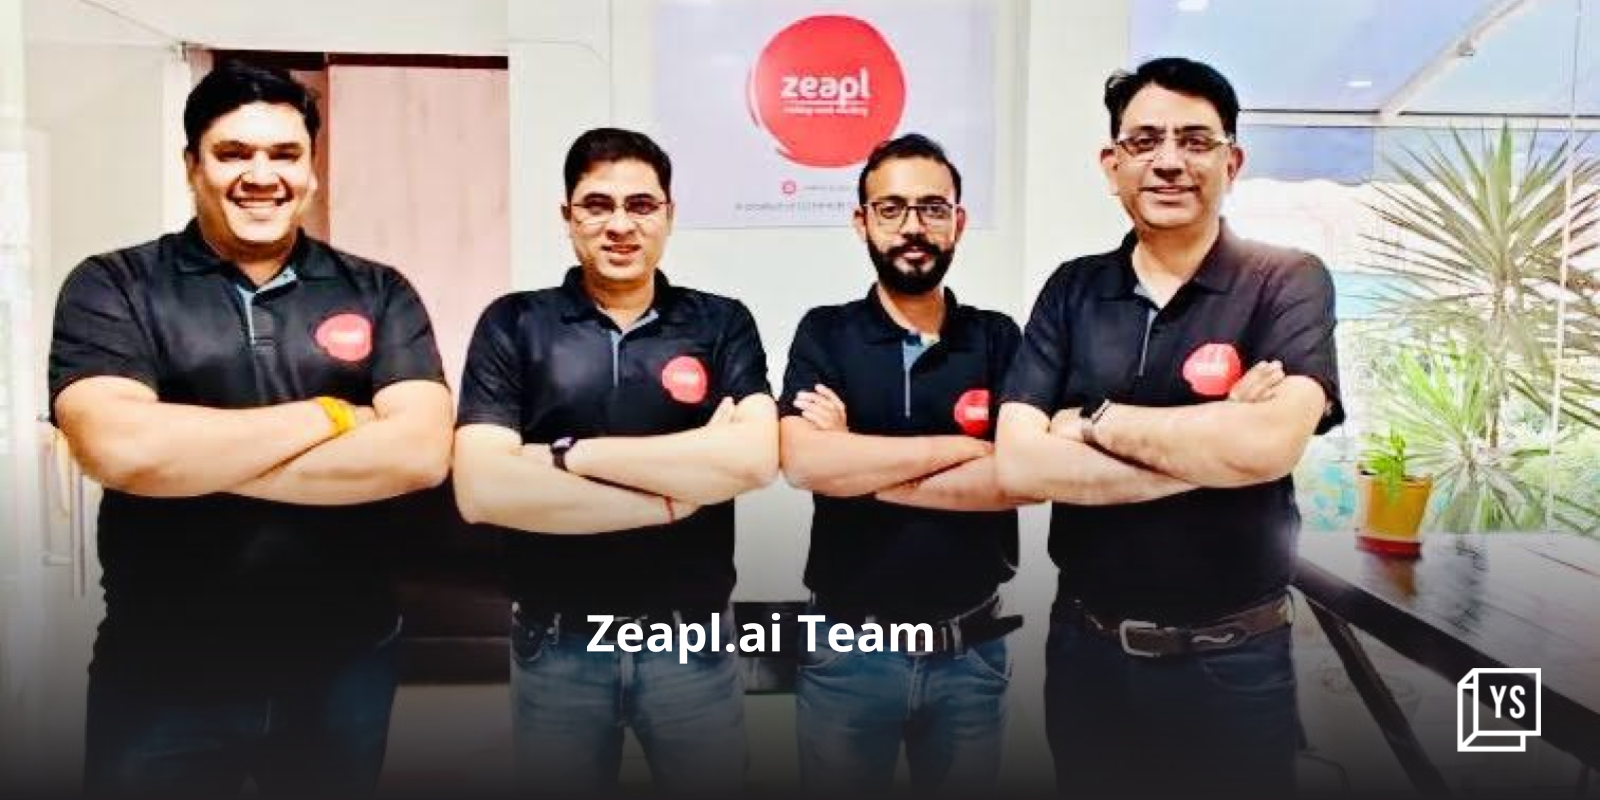 Navigating the digital shift: Zeapl.ai aims to transform enterprise engagement with AI-powered solutions